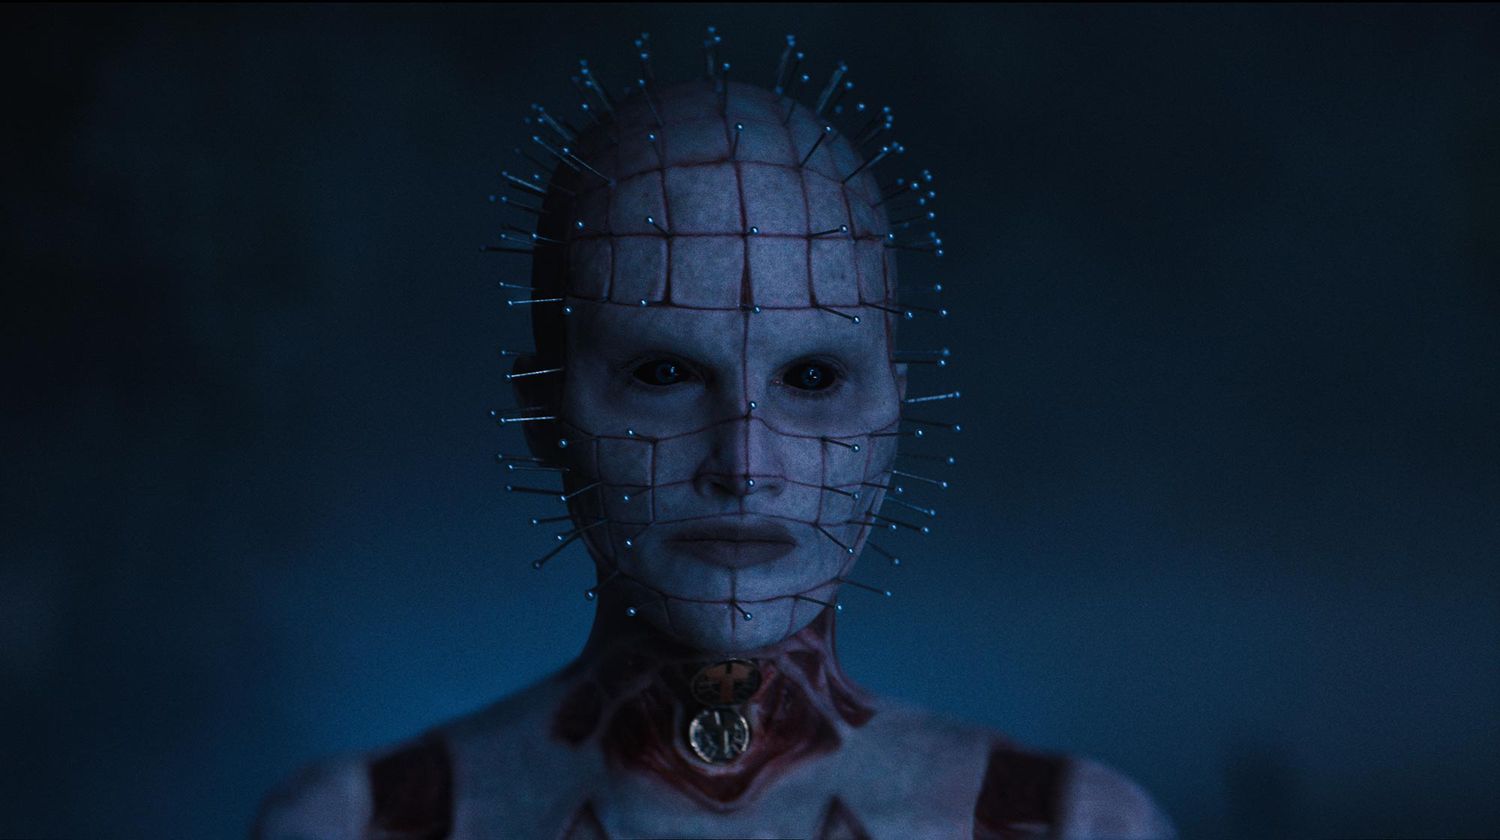 Jamie Clayton's Pinhead promises very painful 'delights' in 'Hellraiser' trailer